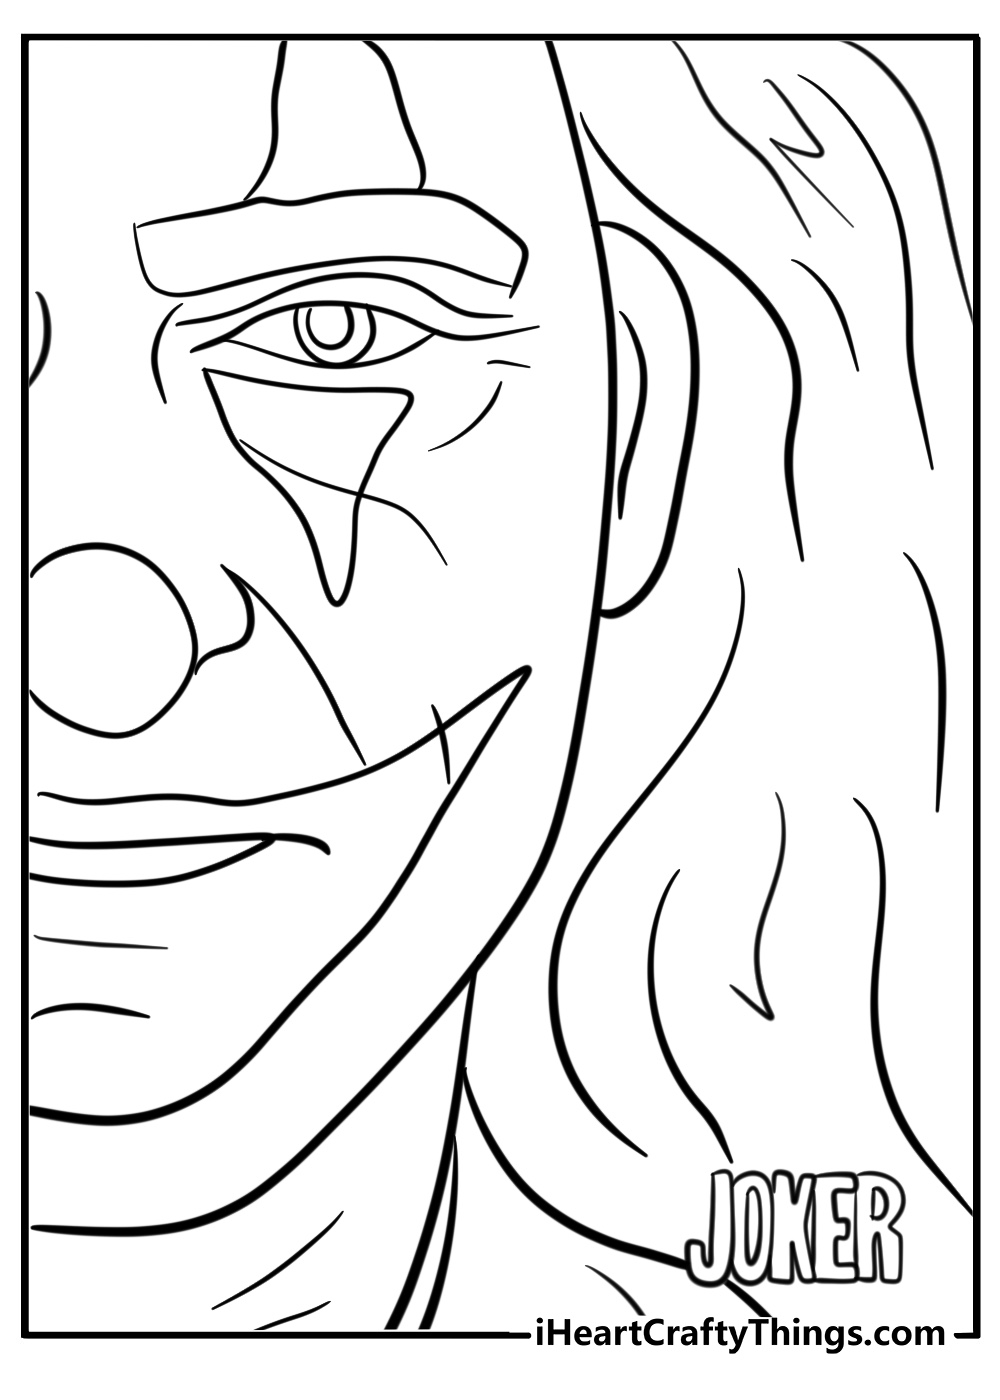 Movie coloring pages for adults